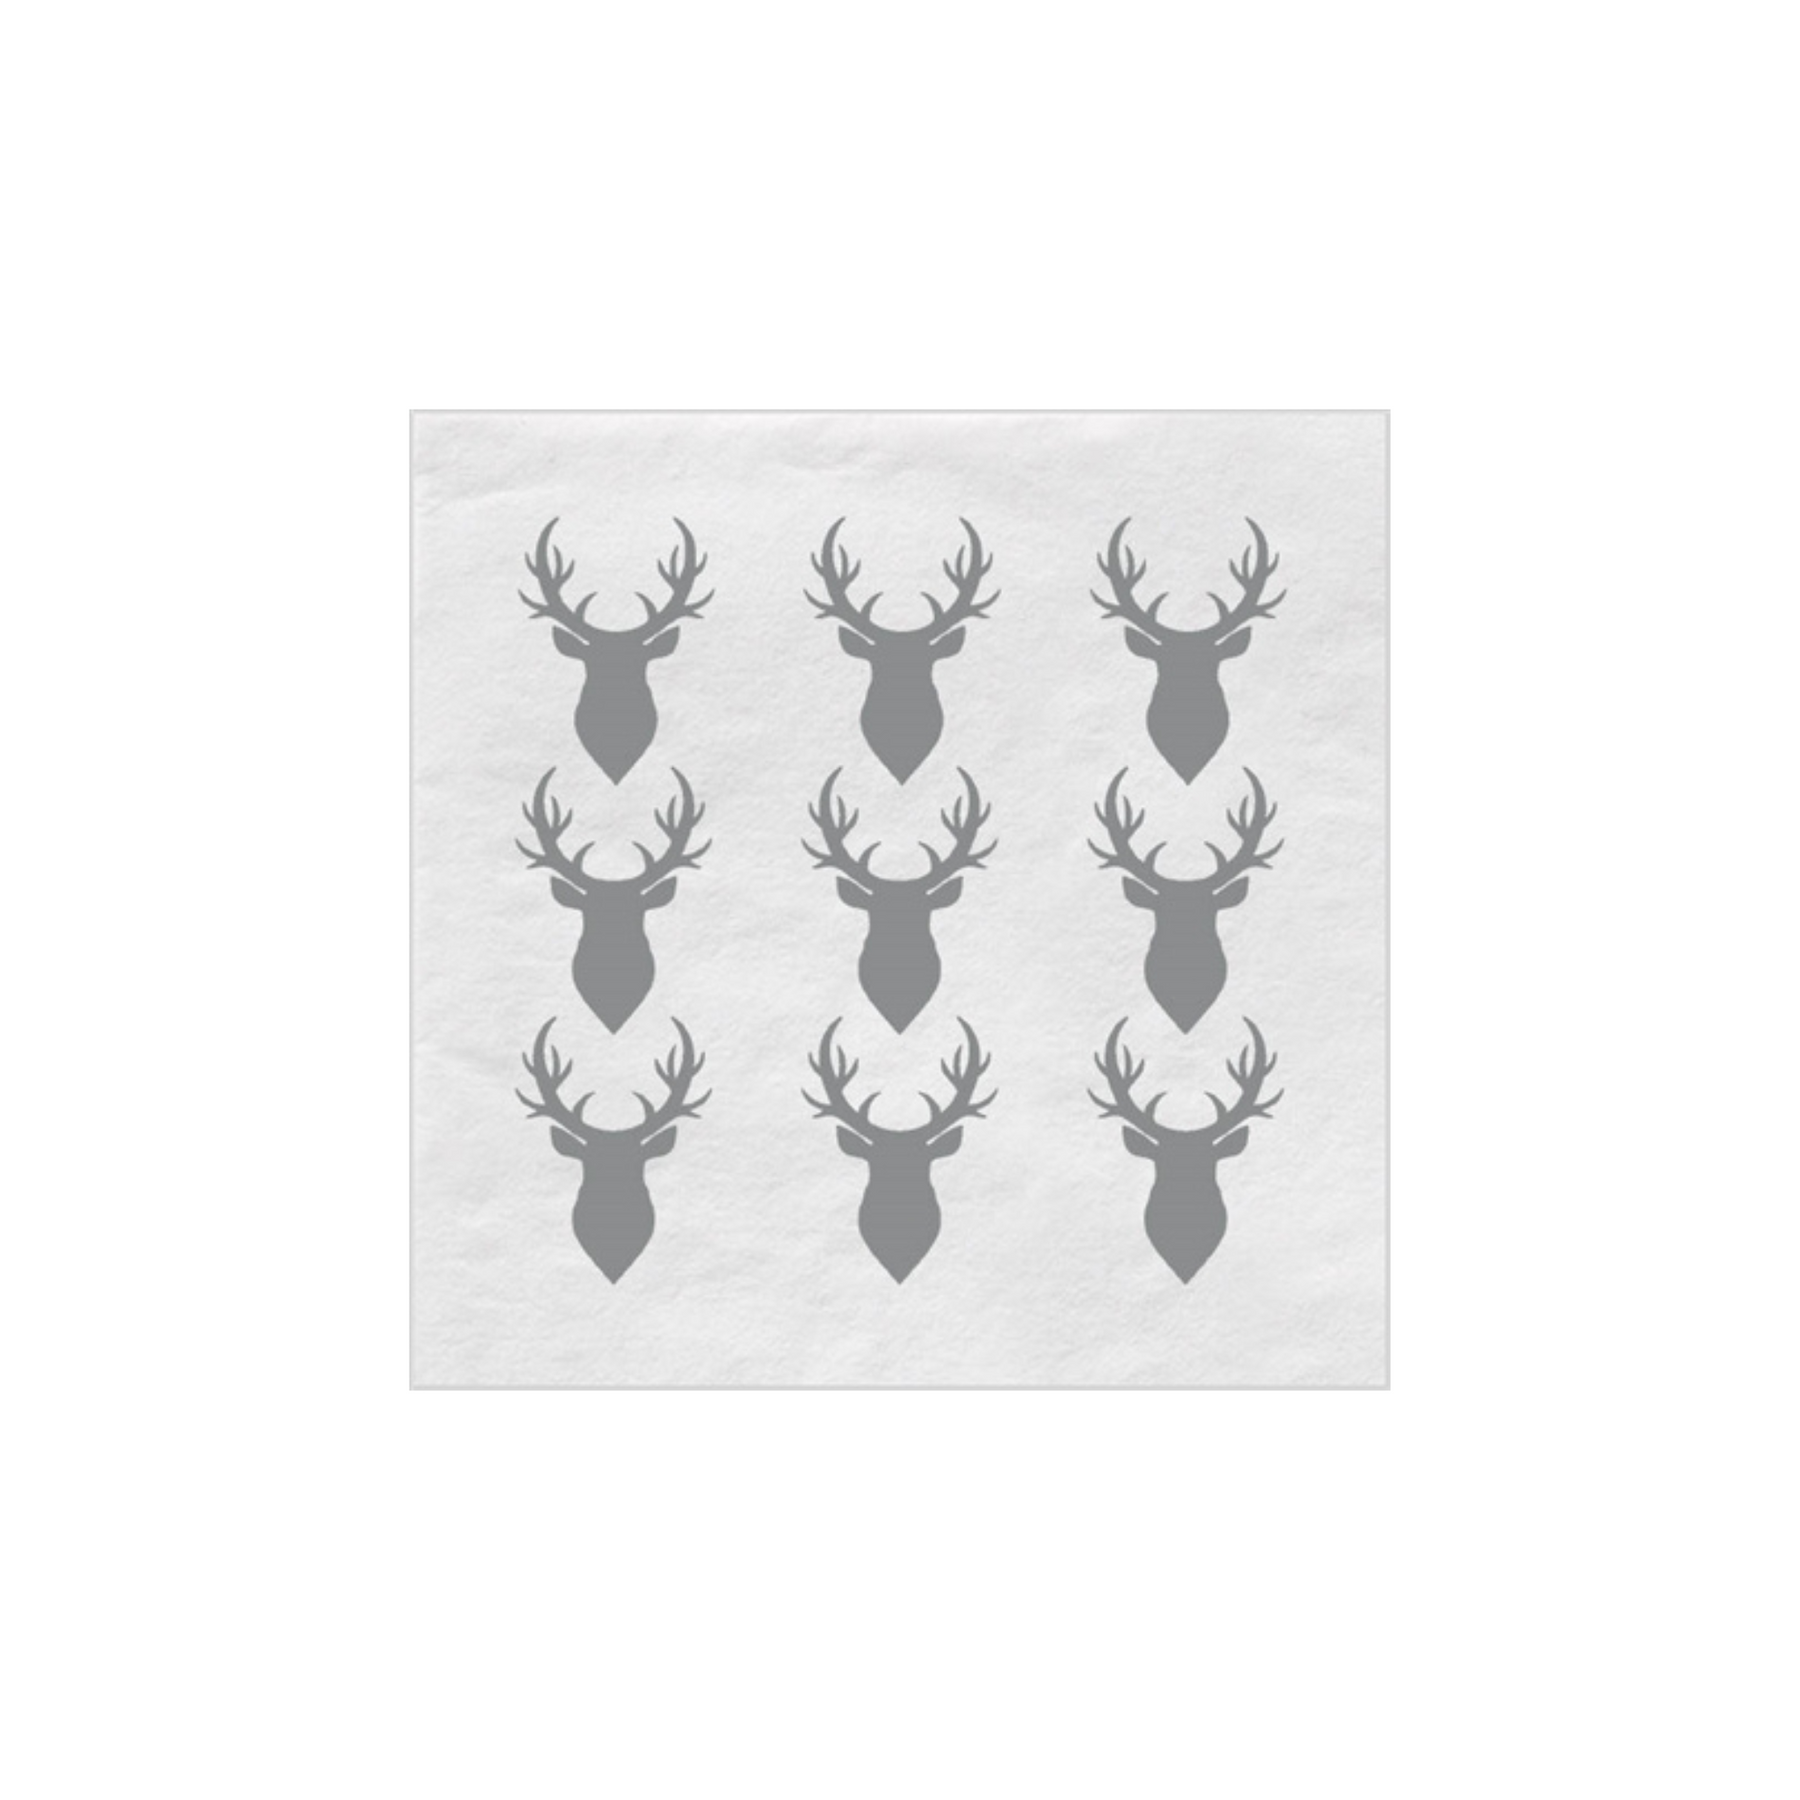 Reindeer Silver Foil Small Napkin